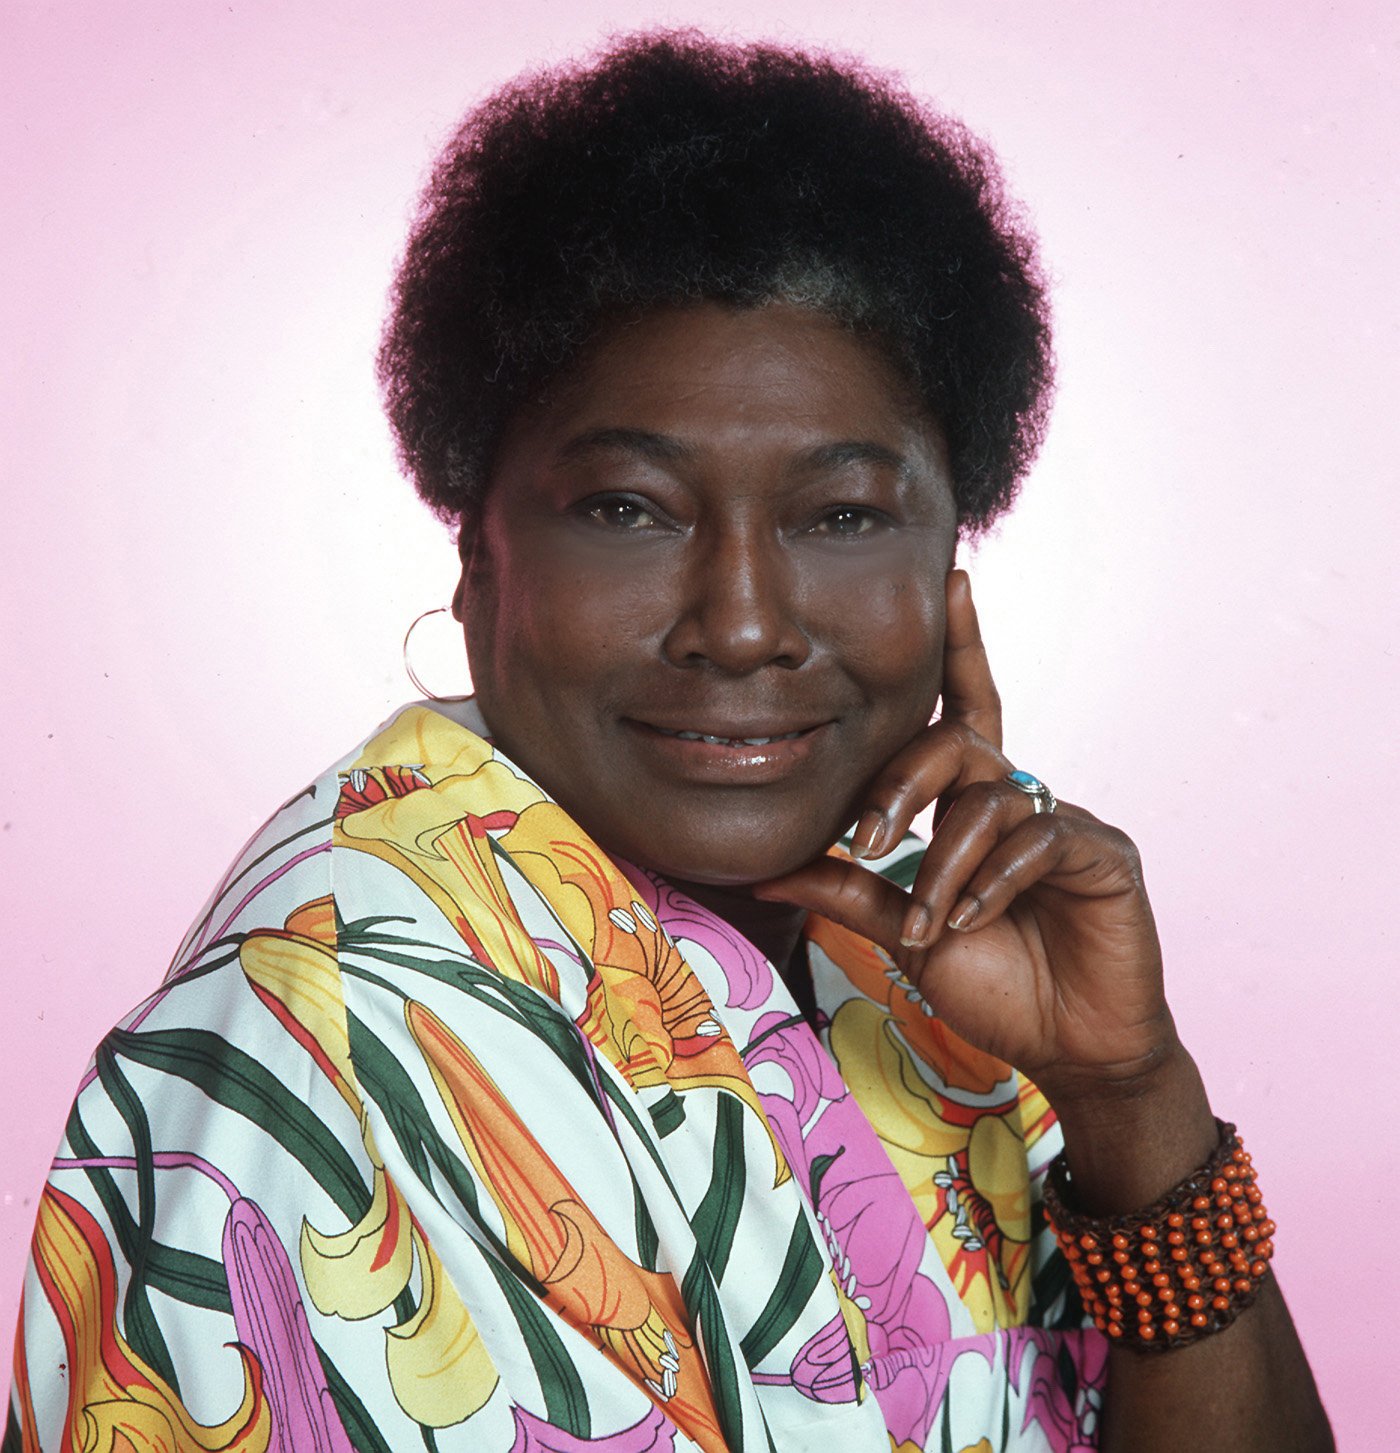 Esther Rolle in costume as Florida Evans for the promotion of "Good Times," Los Angeles, California, 1978. | Source: Getty Images